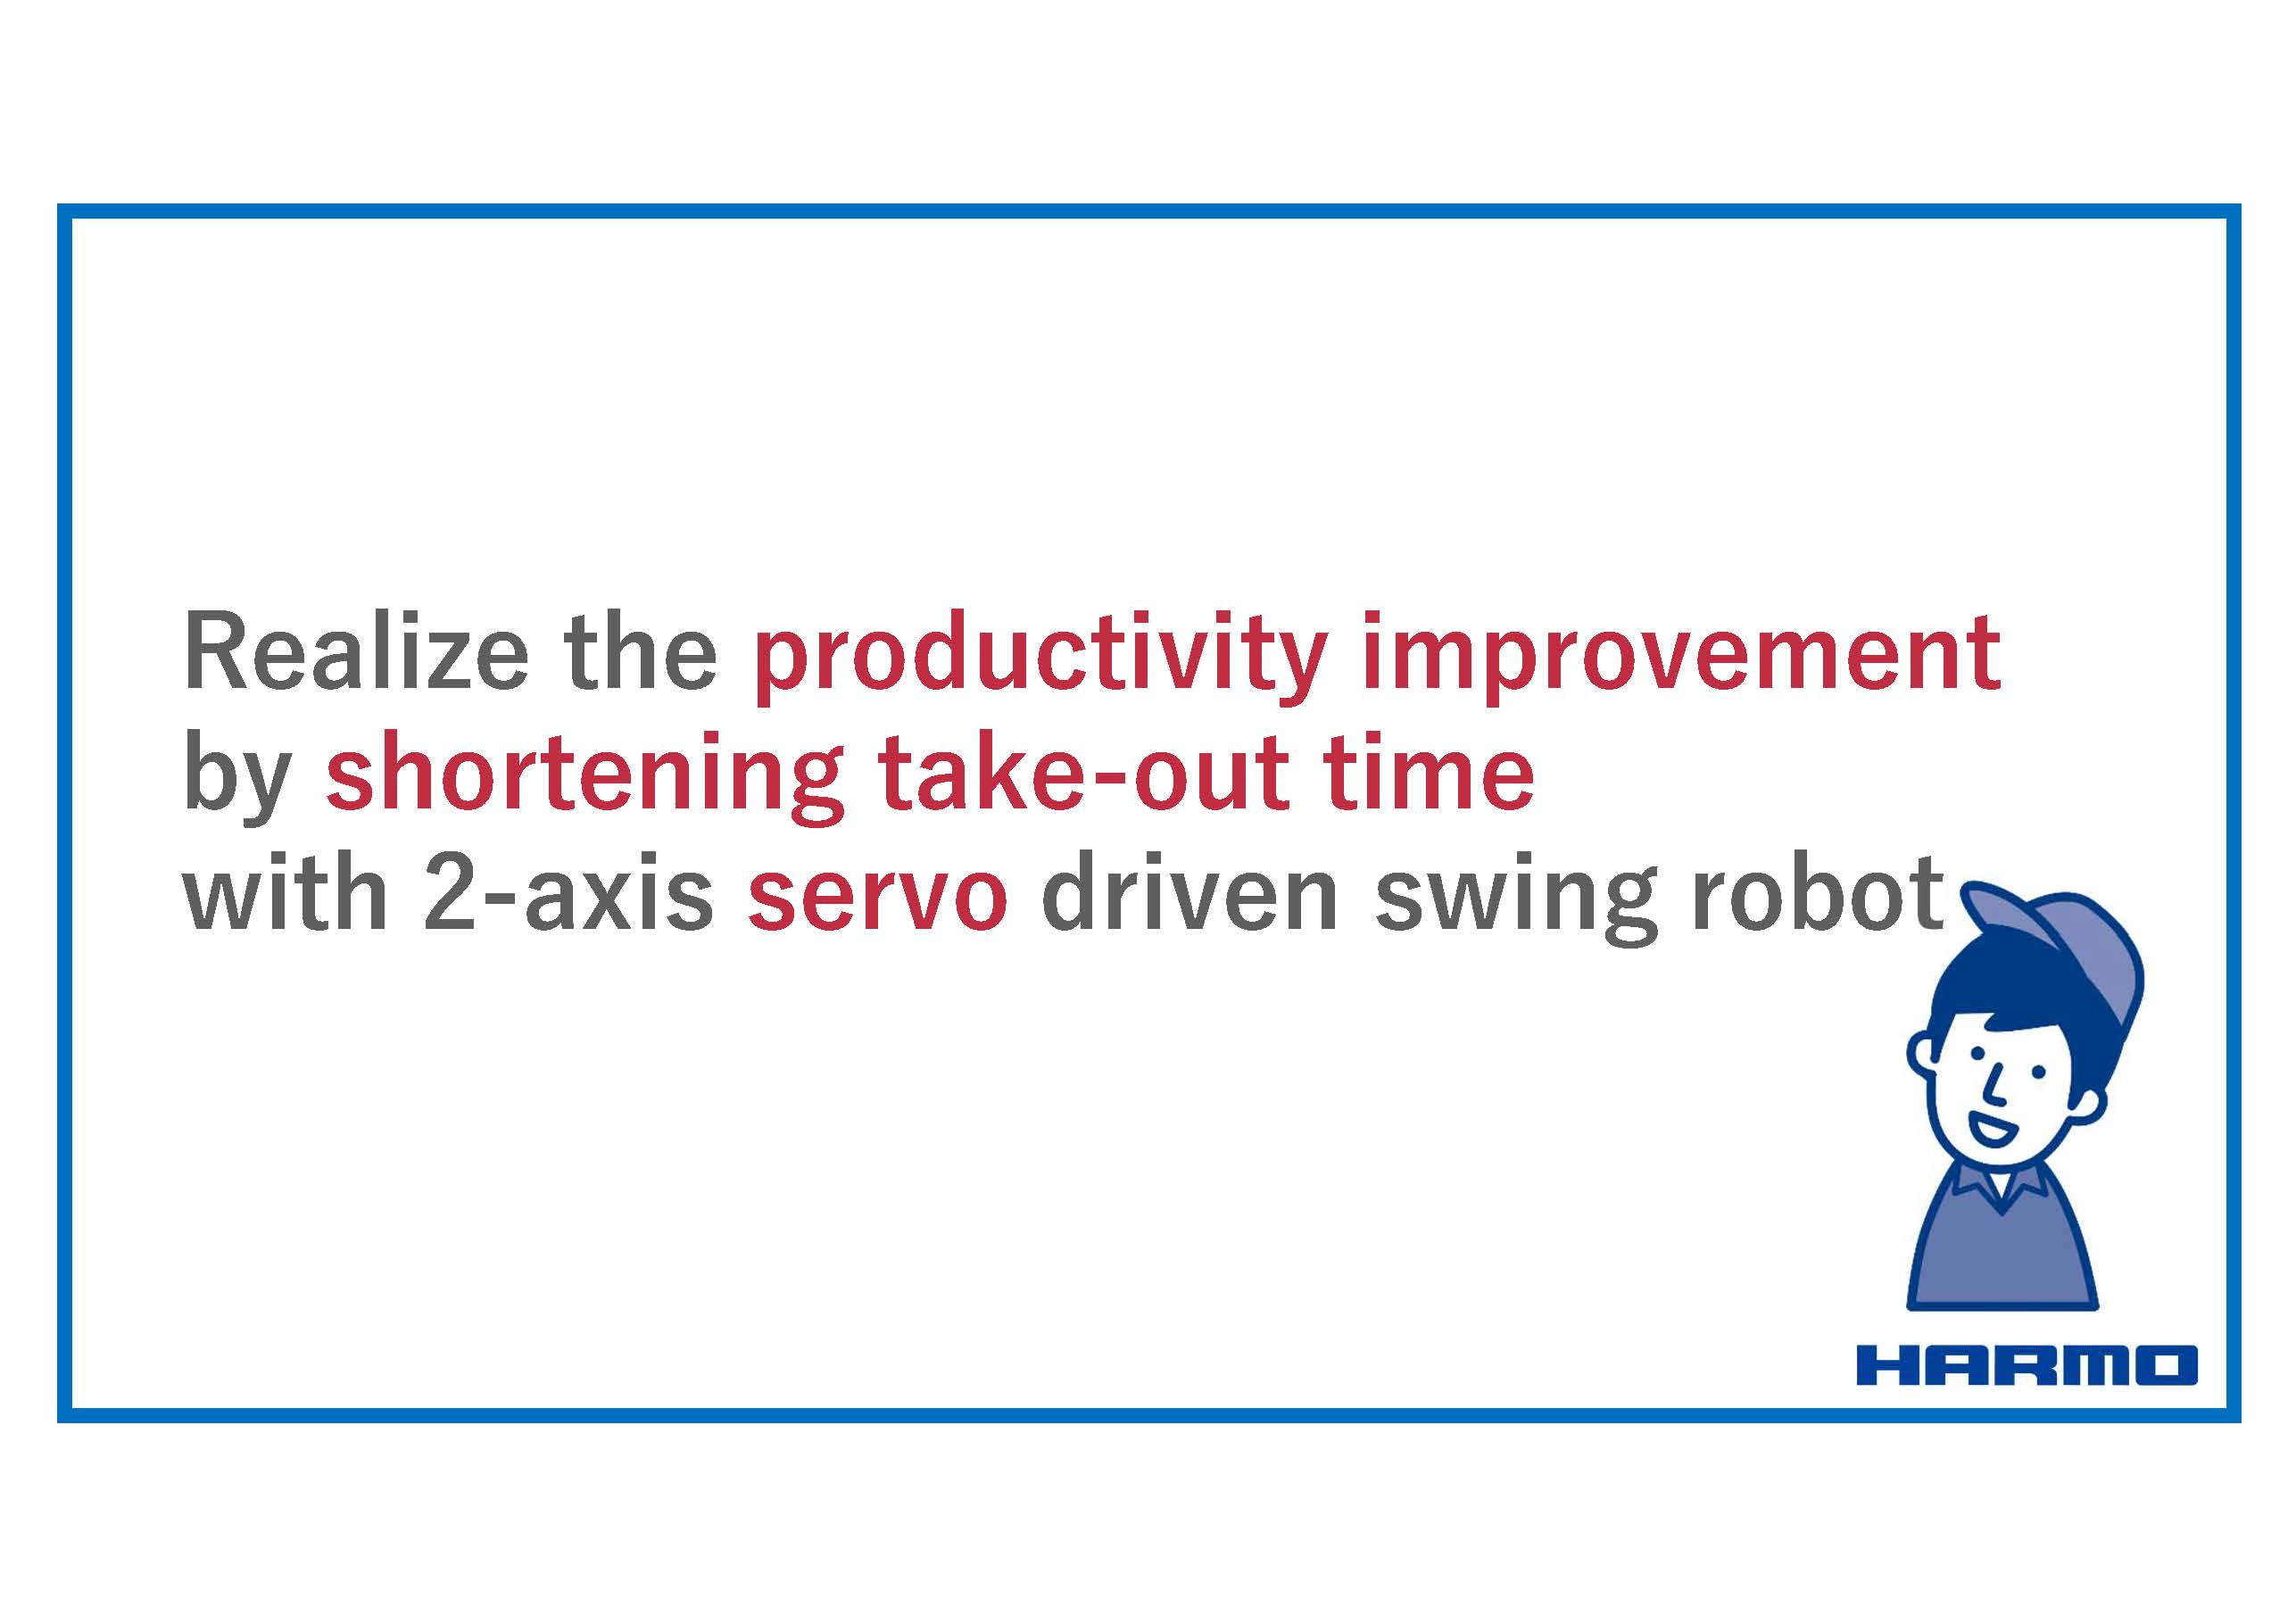 Webinar document｜Realize the productivity improvement by shortening take-out time with 2-axis servo driven swing robot